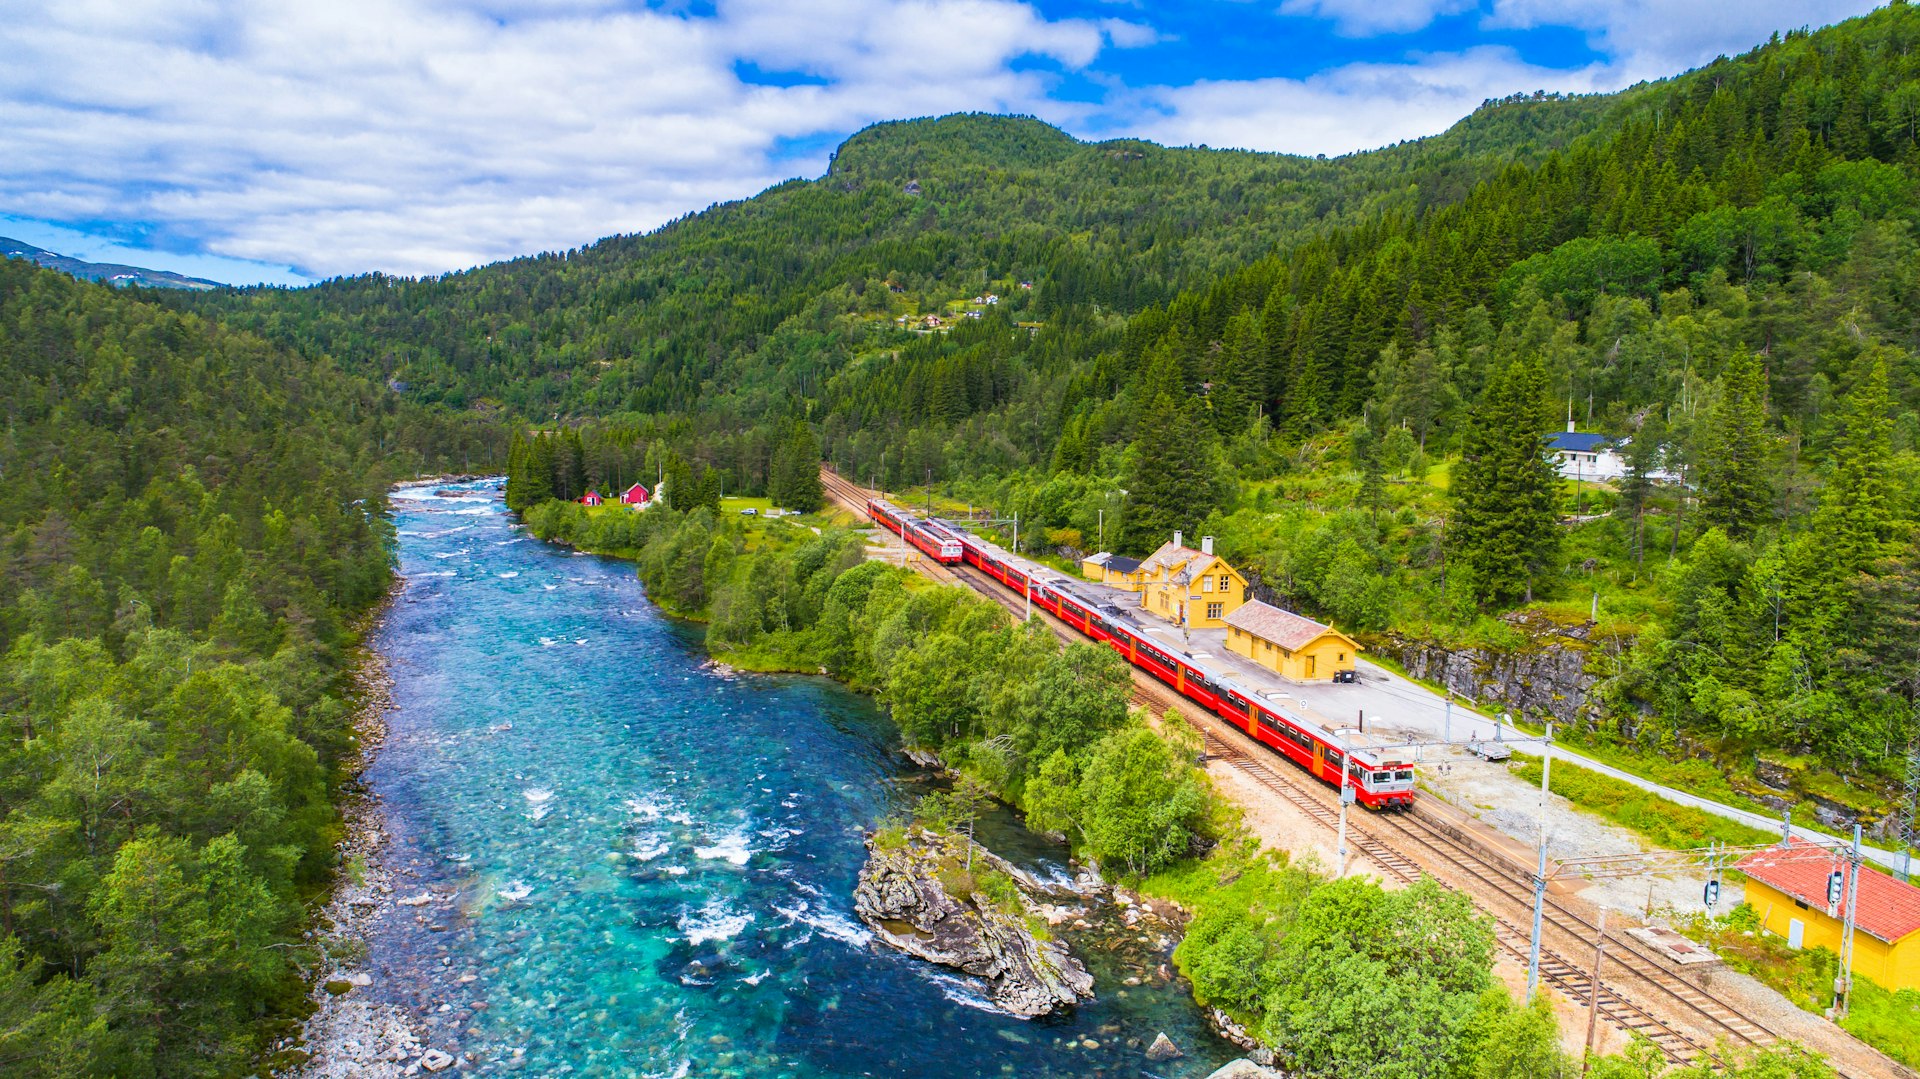 The Oslo to Bergen train runs along a railway track beside a blue river in Norway.